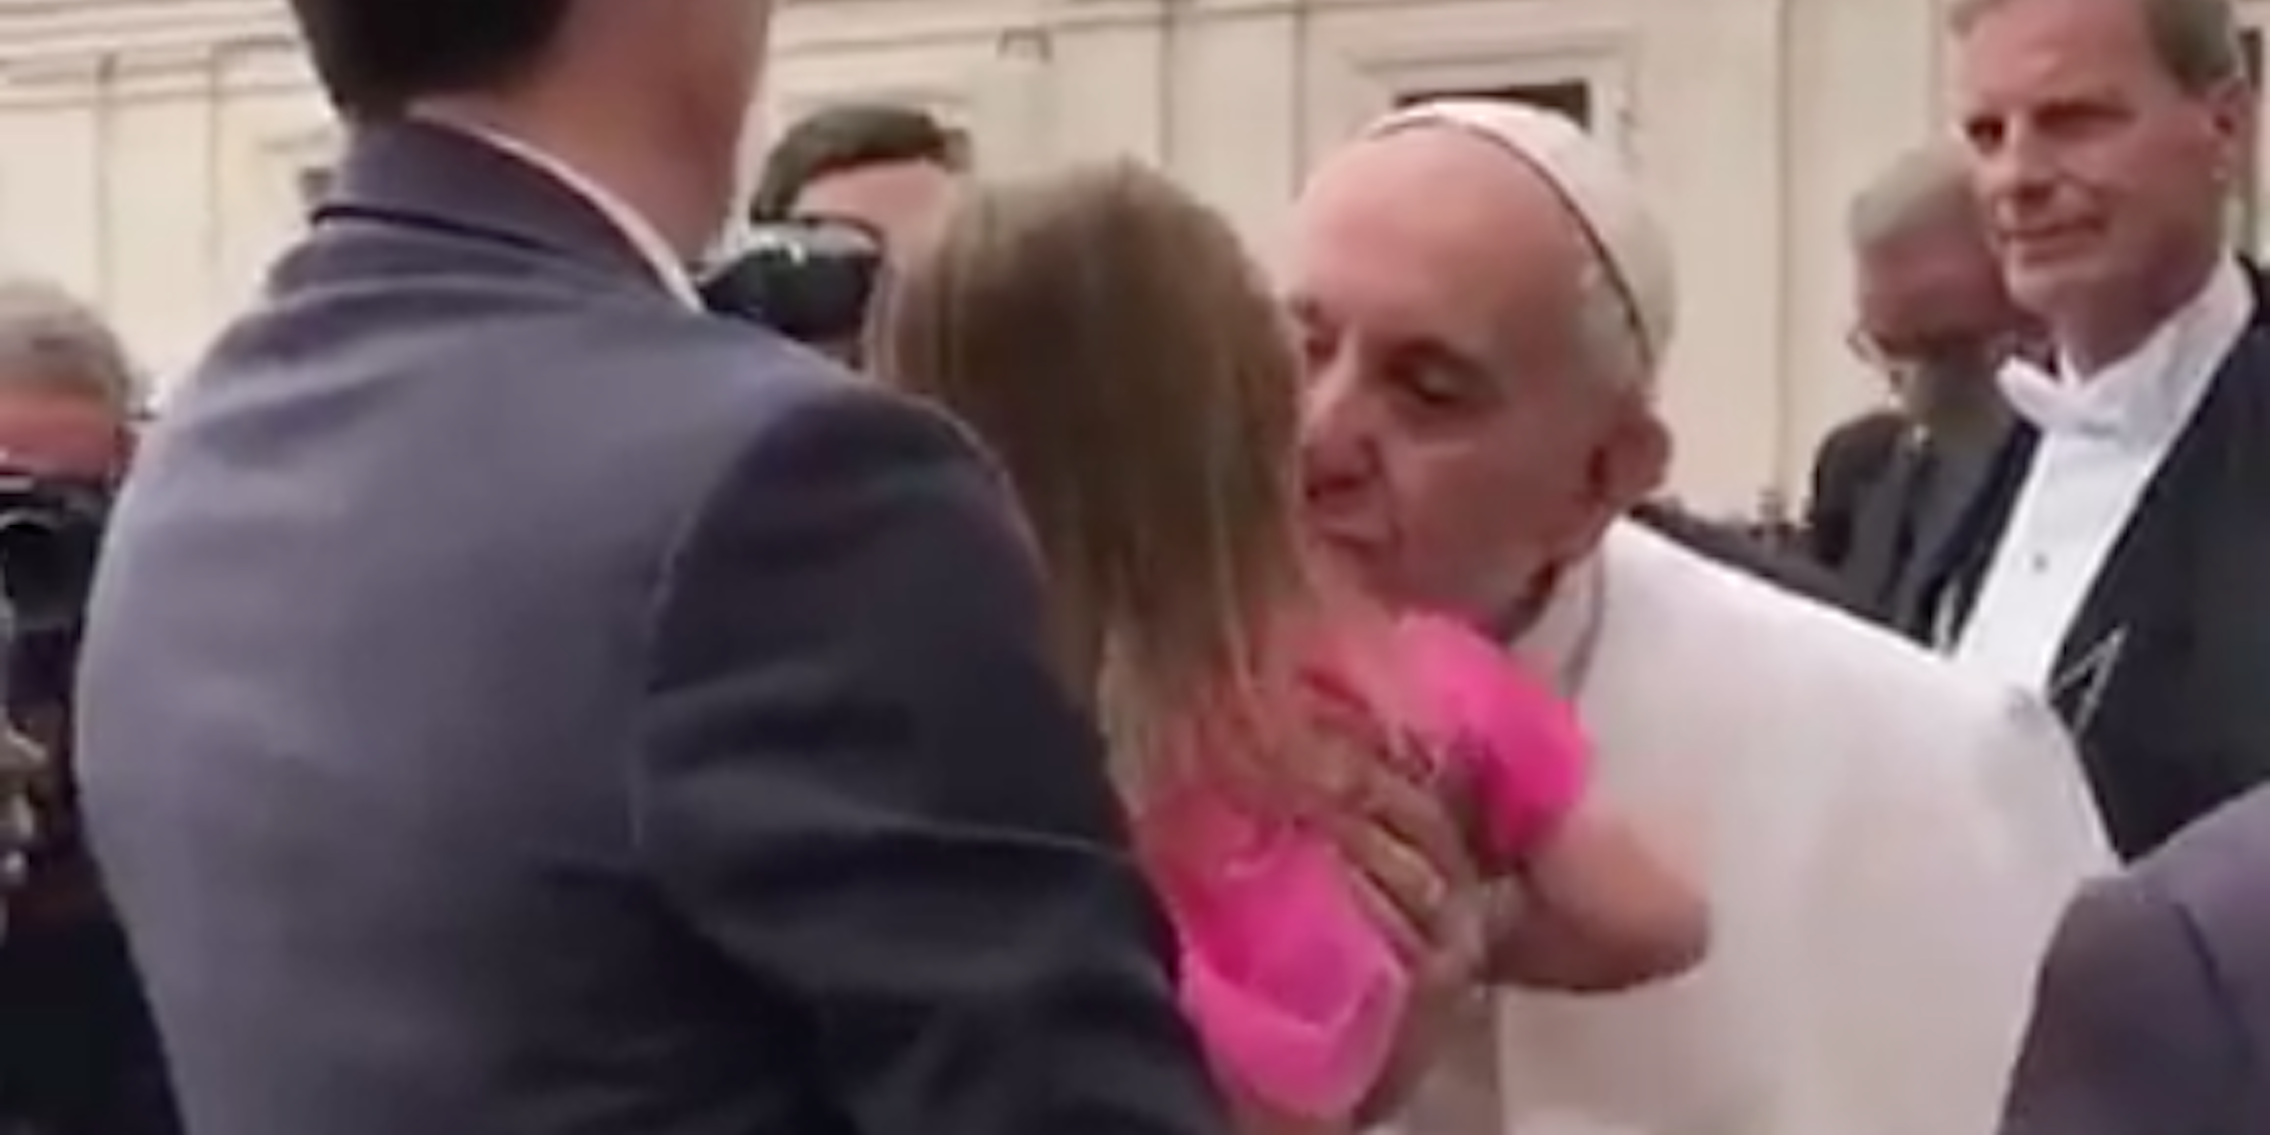 Little girl steals Pope hat